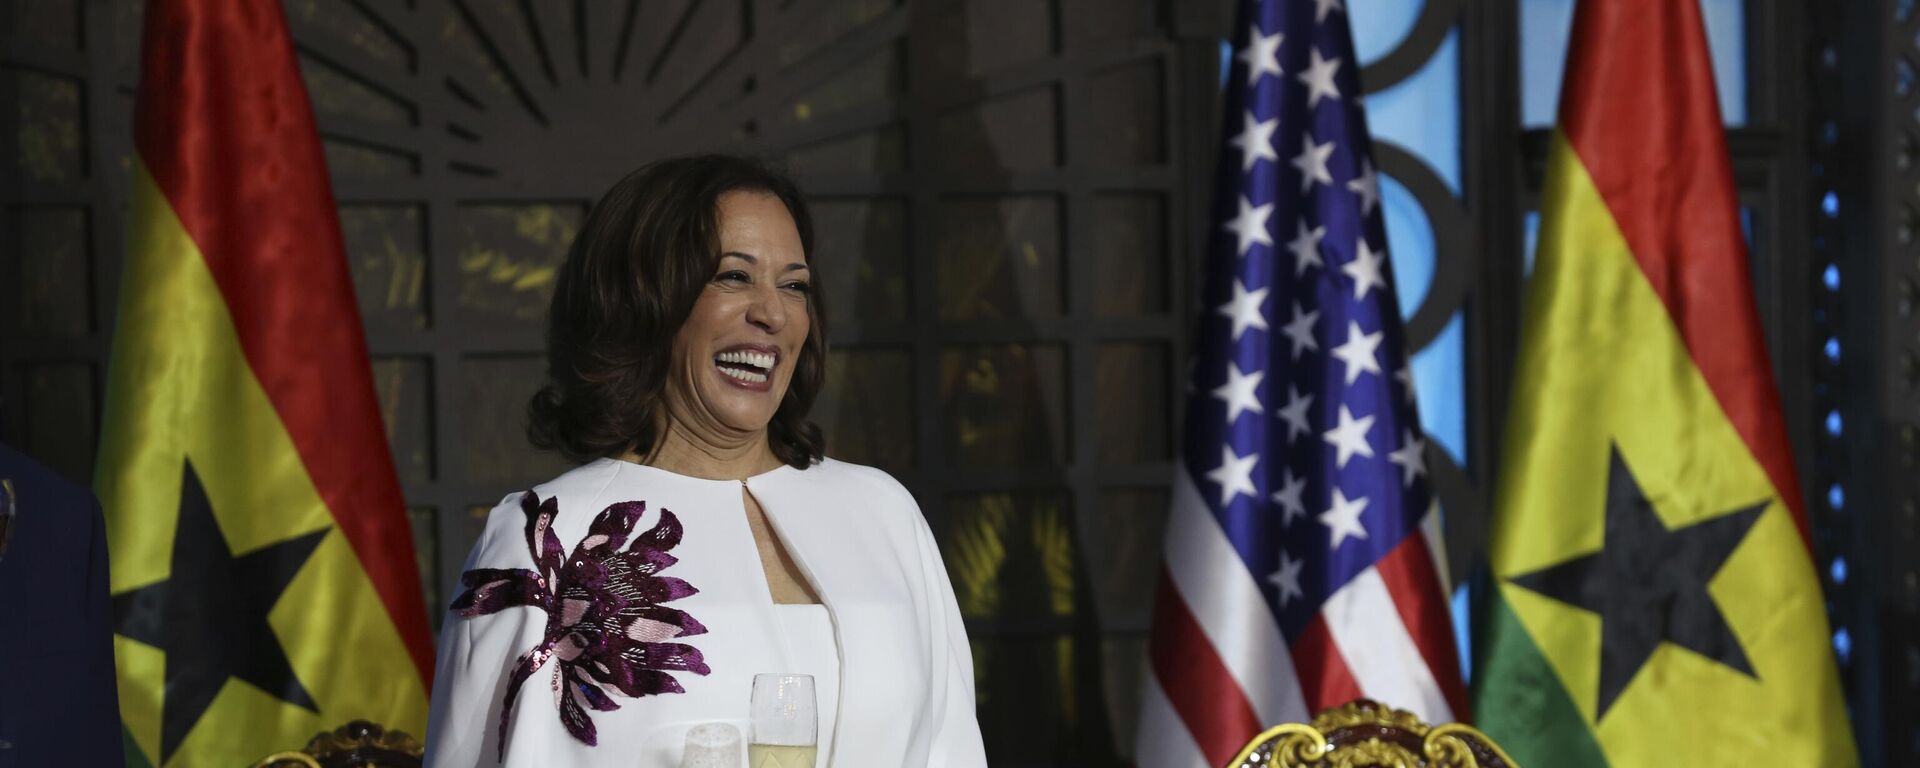 U.S. Vice President Kamala Harris laughs during a state banquet in Accra, Ghana, Monday, March 27, 2023 - Sputnik International, 1920, 28.03.2023